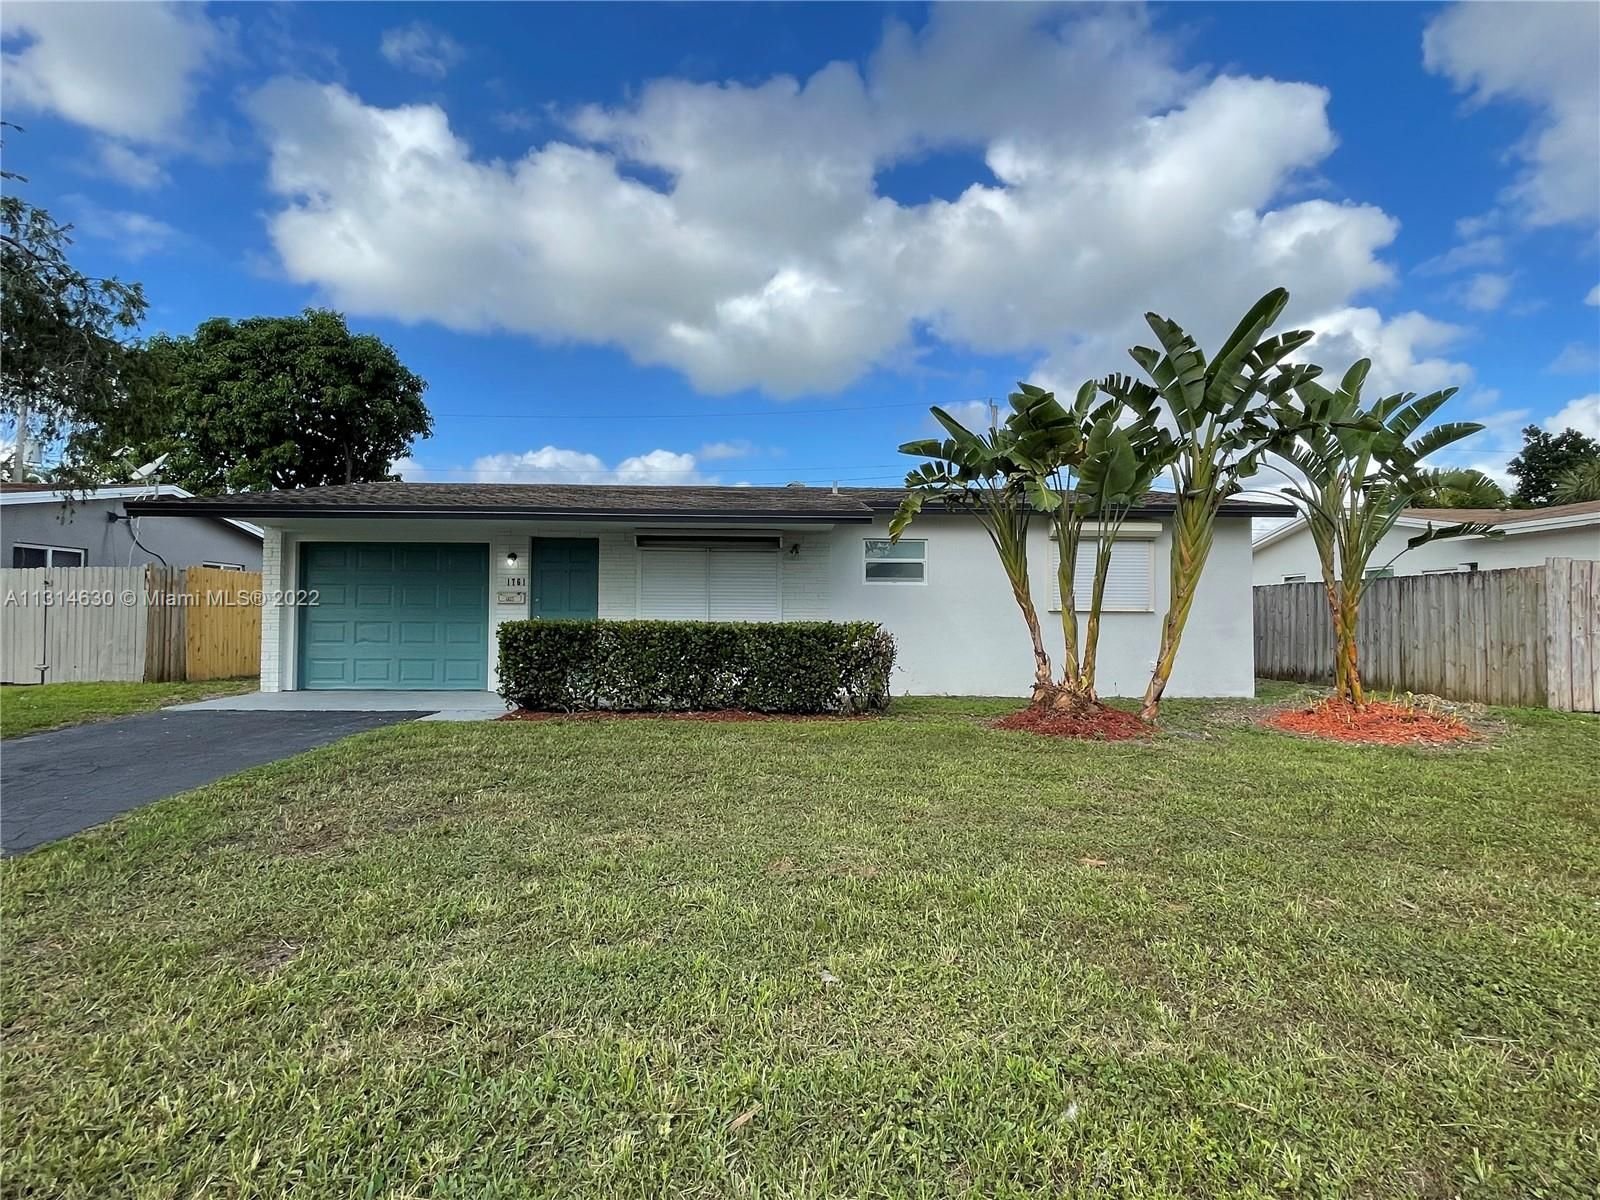 Real estate property located at 1761 38th St, Broward County, Oakland Park, FL